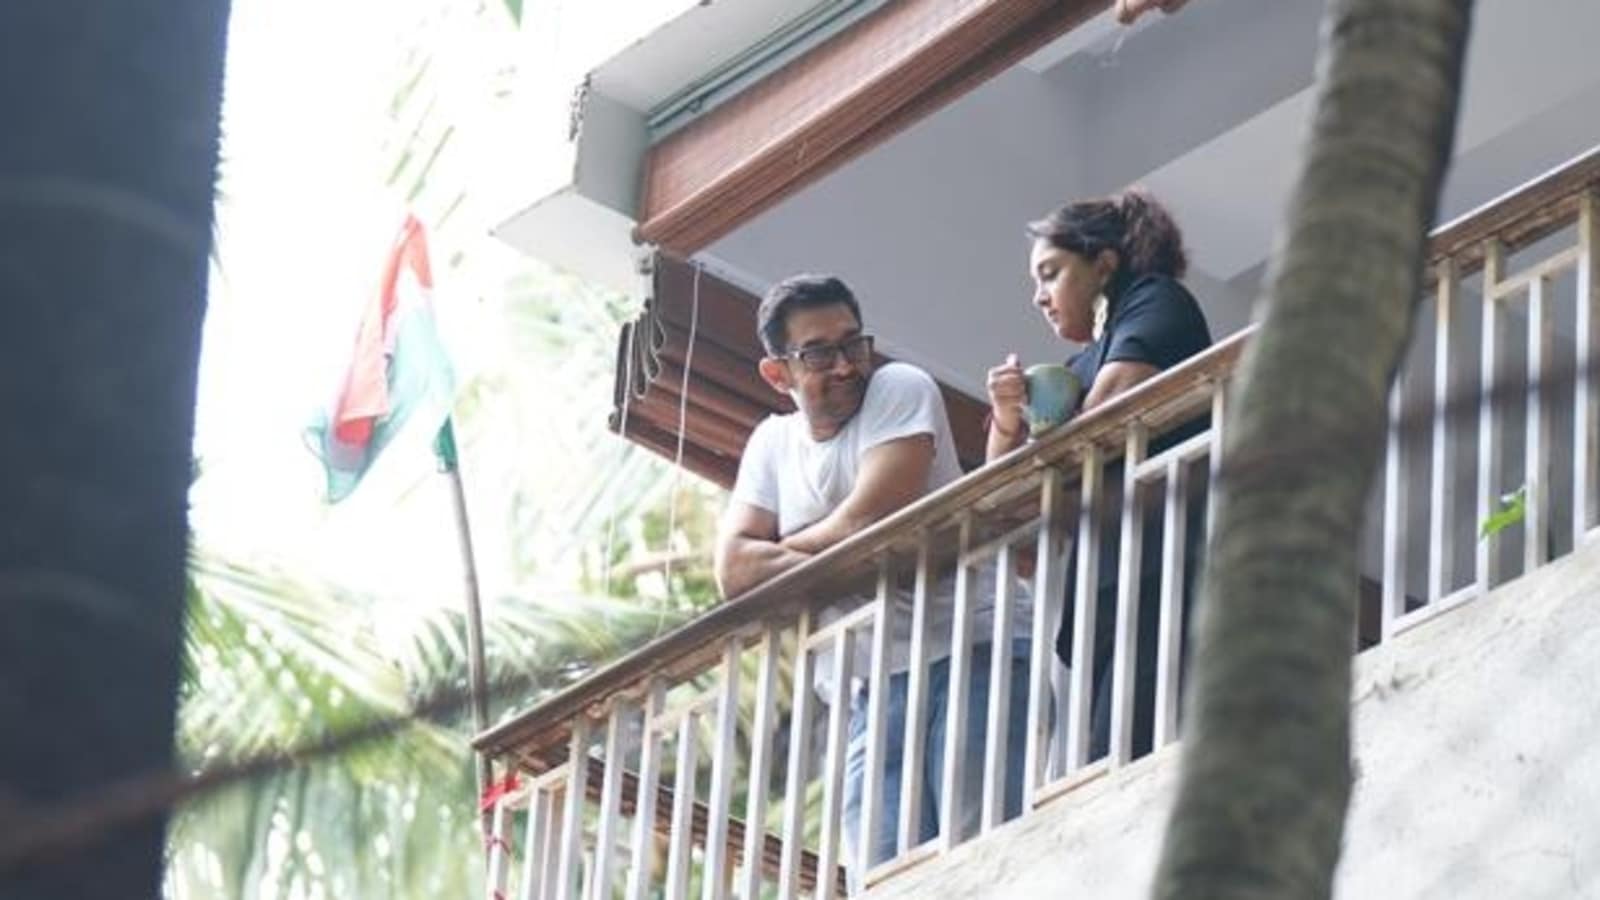 Aamir Khan joins Har Ghar Tiranga campaign, displays tricolour at his dwelling as he spends time with Ira Khan in balcony